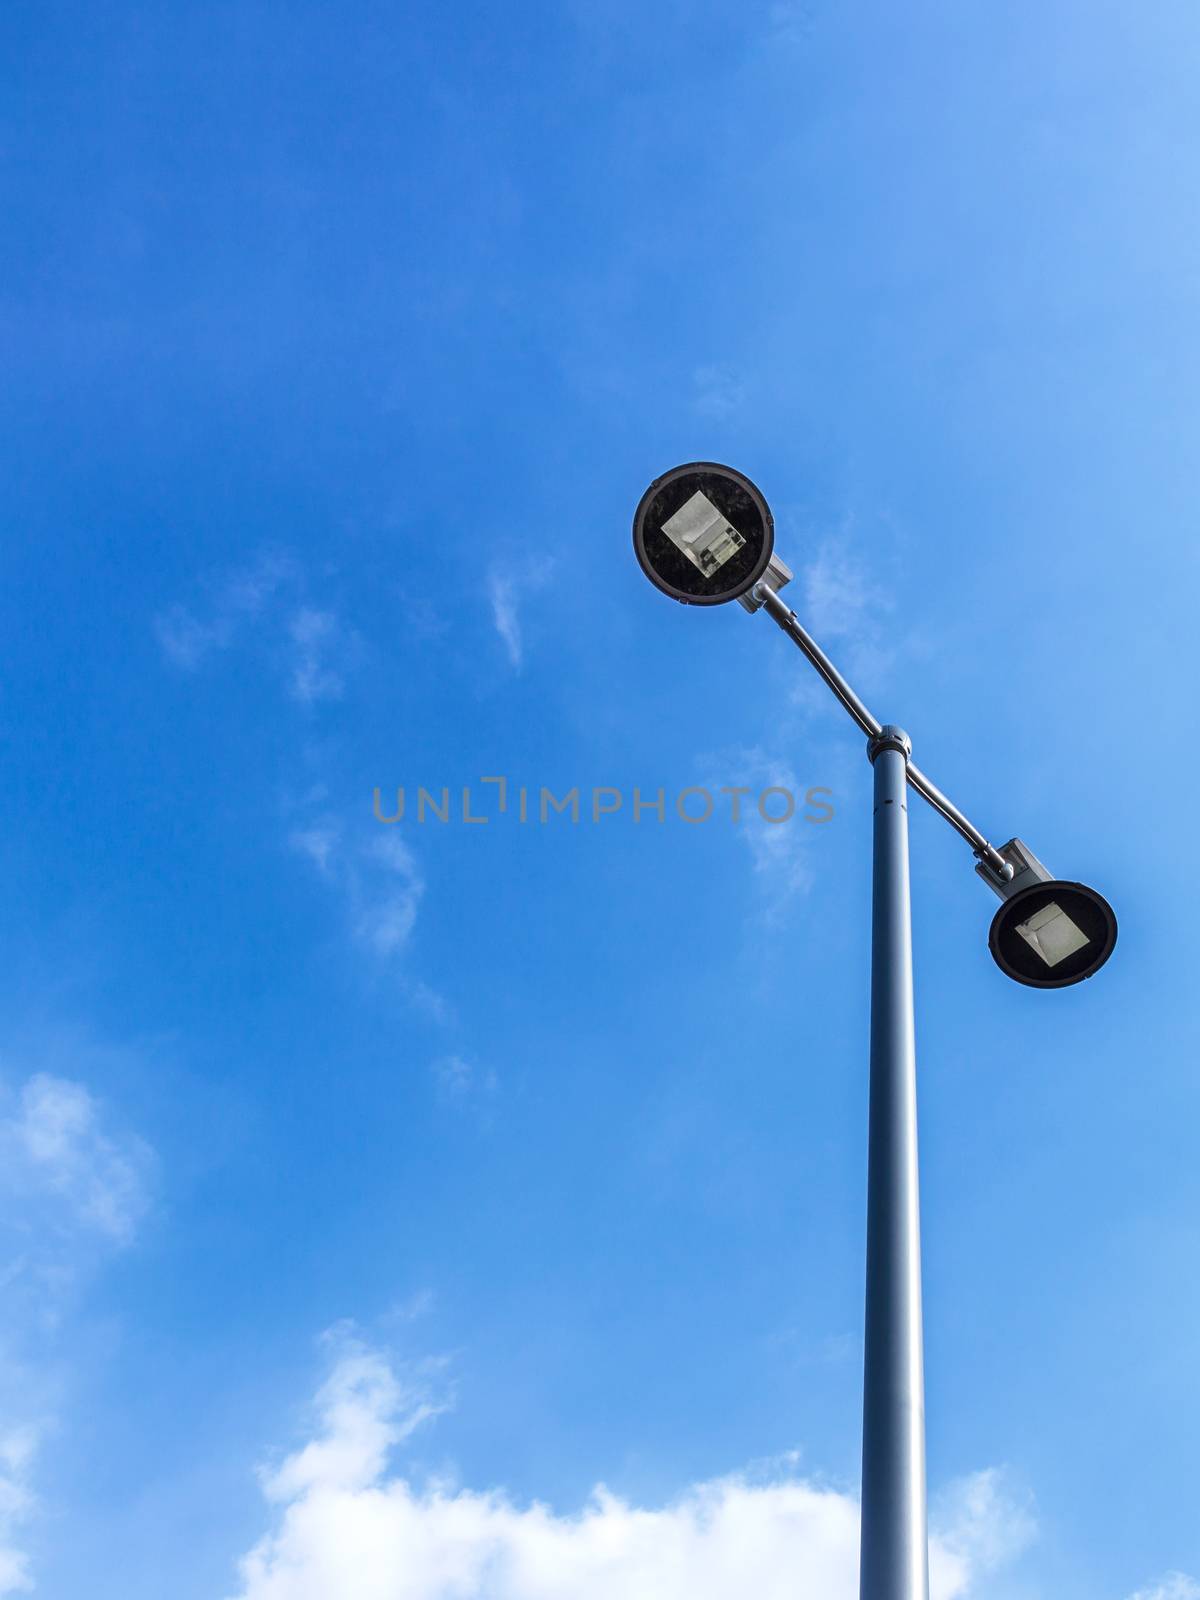 Street light pole over blue sky with clouds. Copy space.